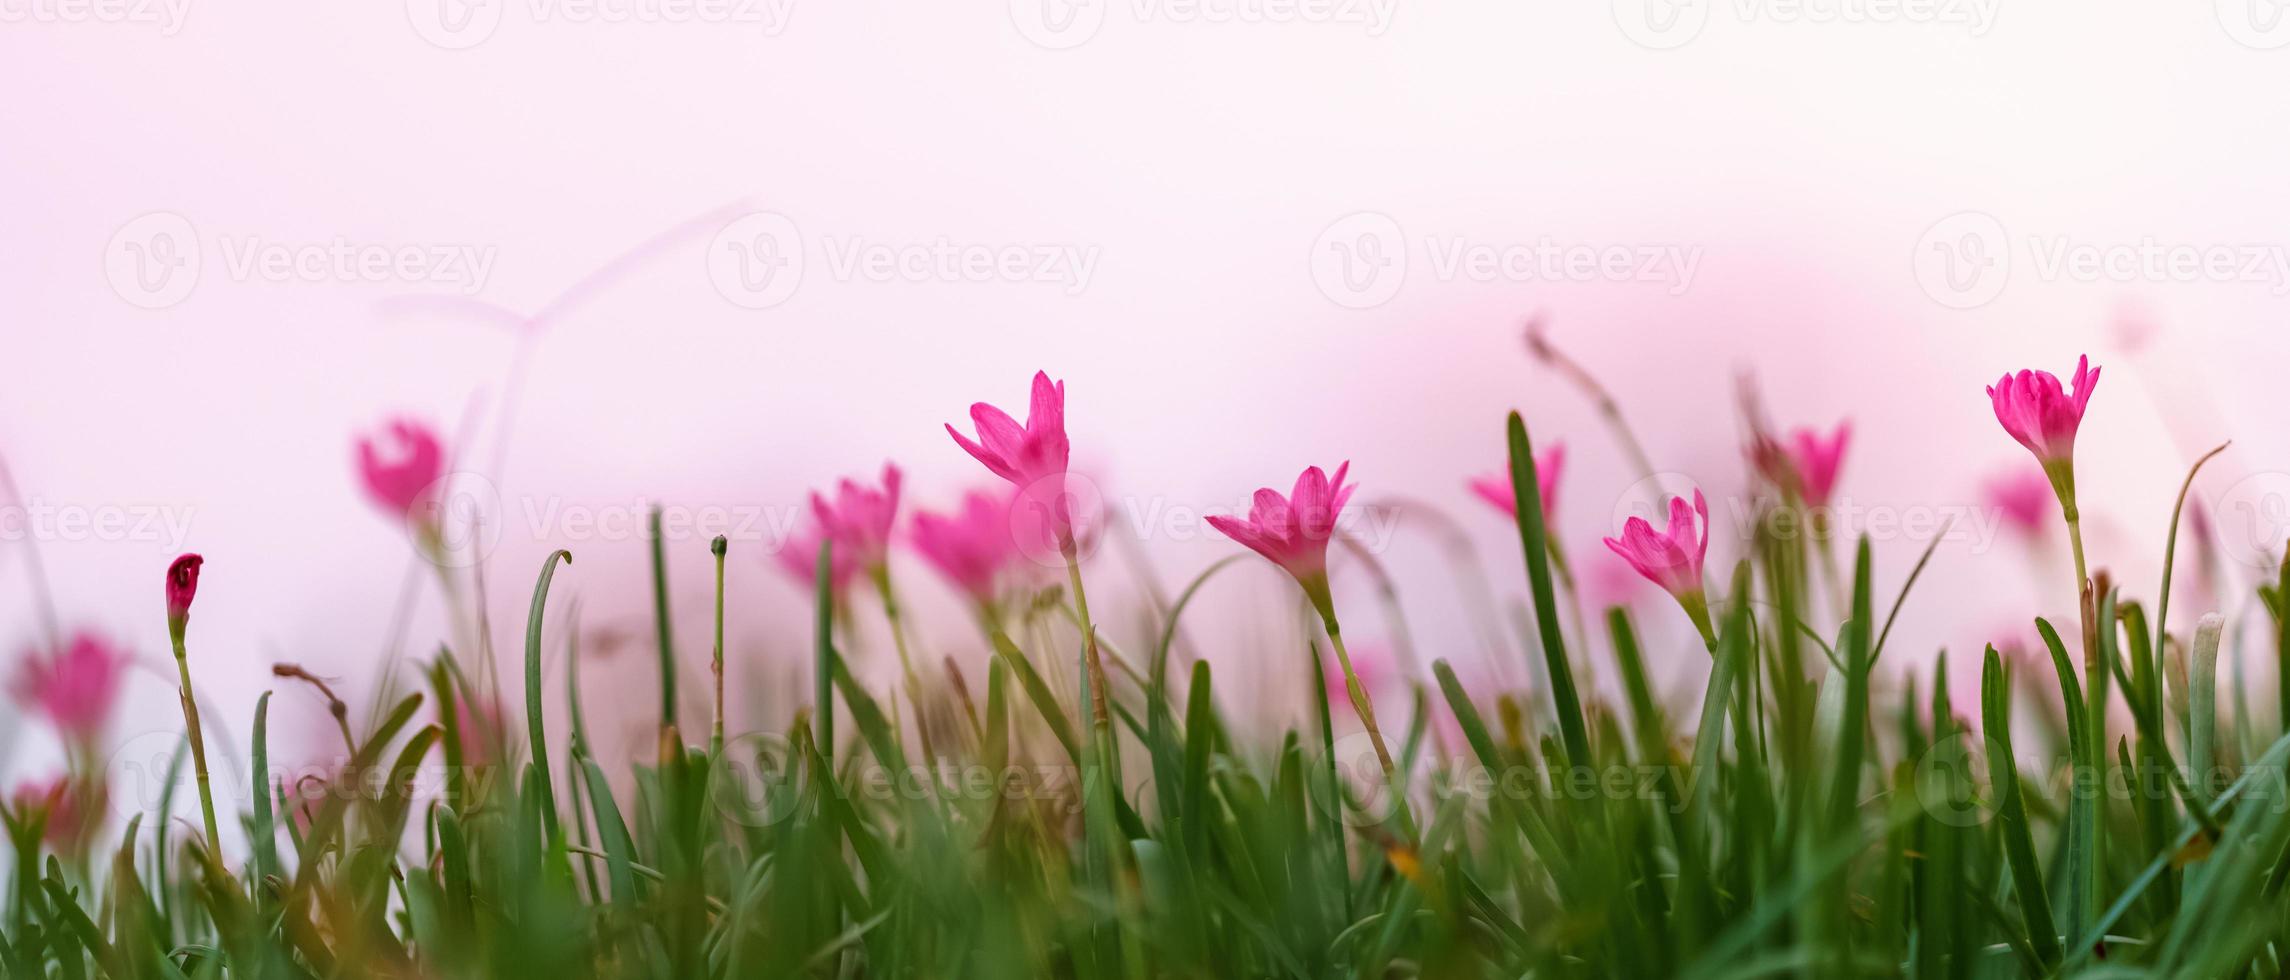 Closeup of pink purple flower under sunlight with green leaf nature background with copy space using as background natural plants landscape, ecology wallpaper cover page concept. photo